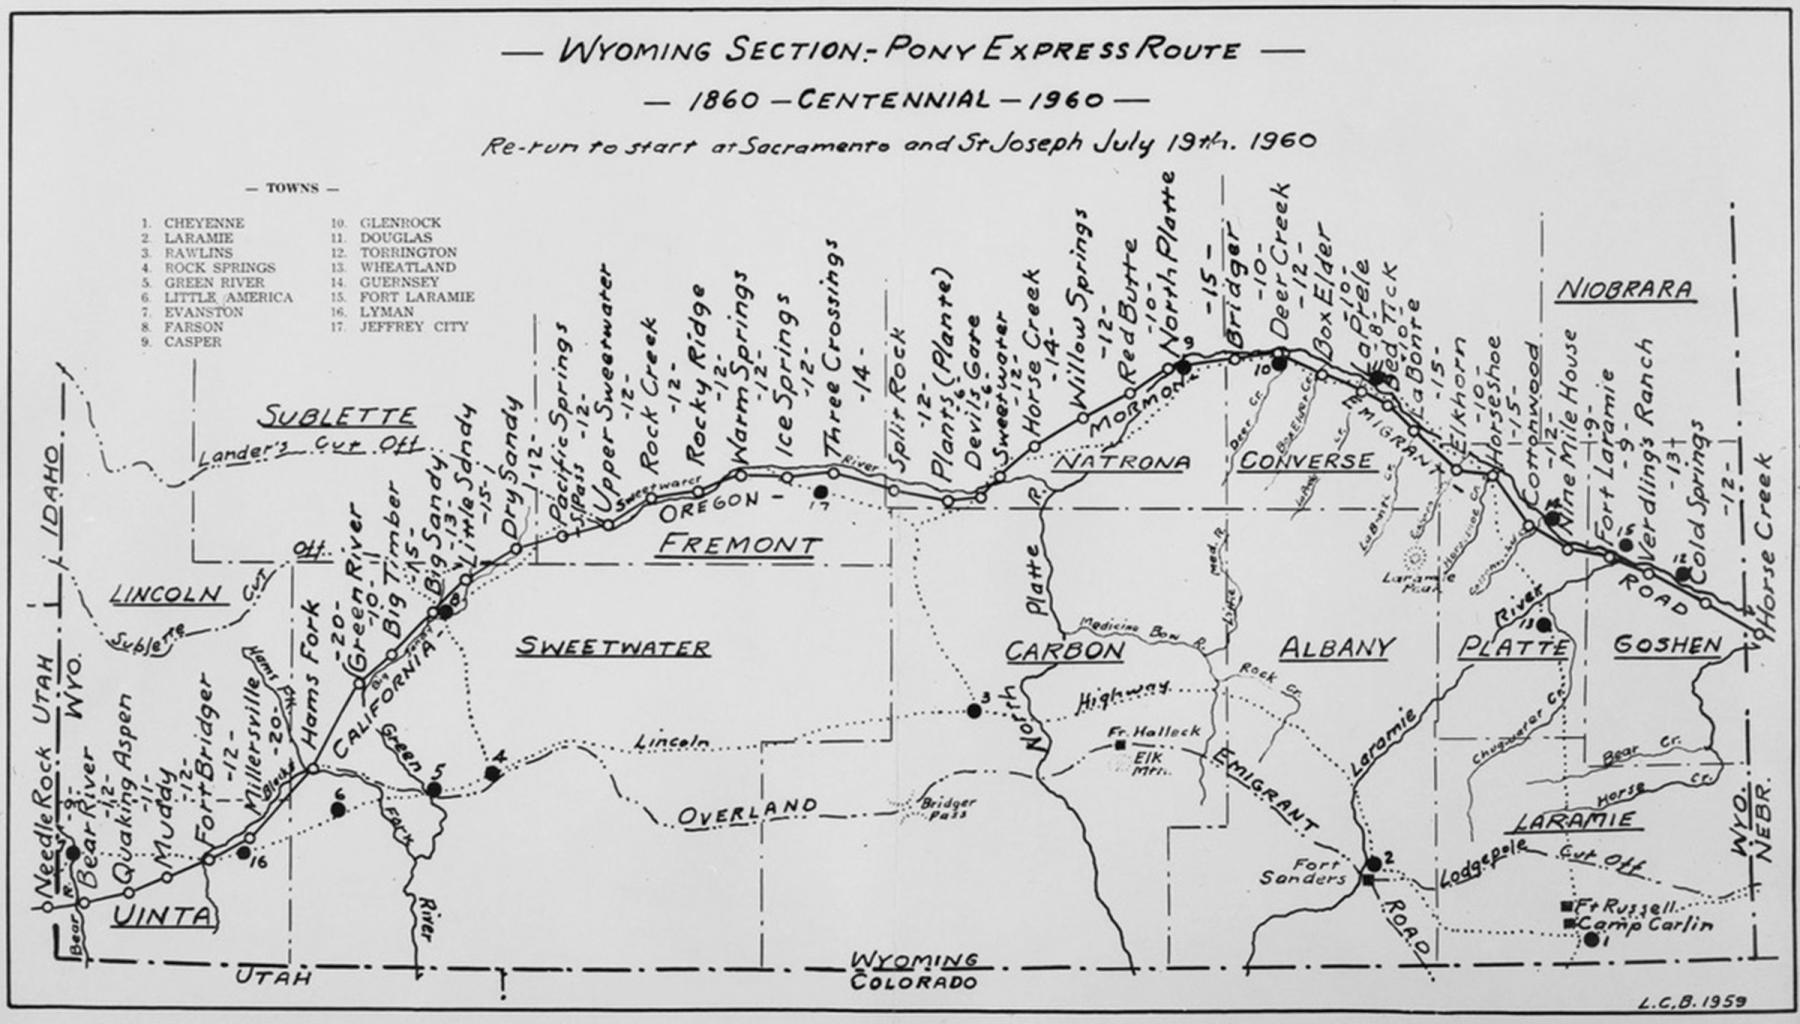 The Pony Express in Wyoming | WyoHistory.org